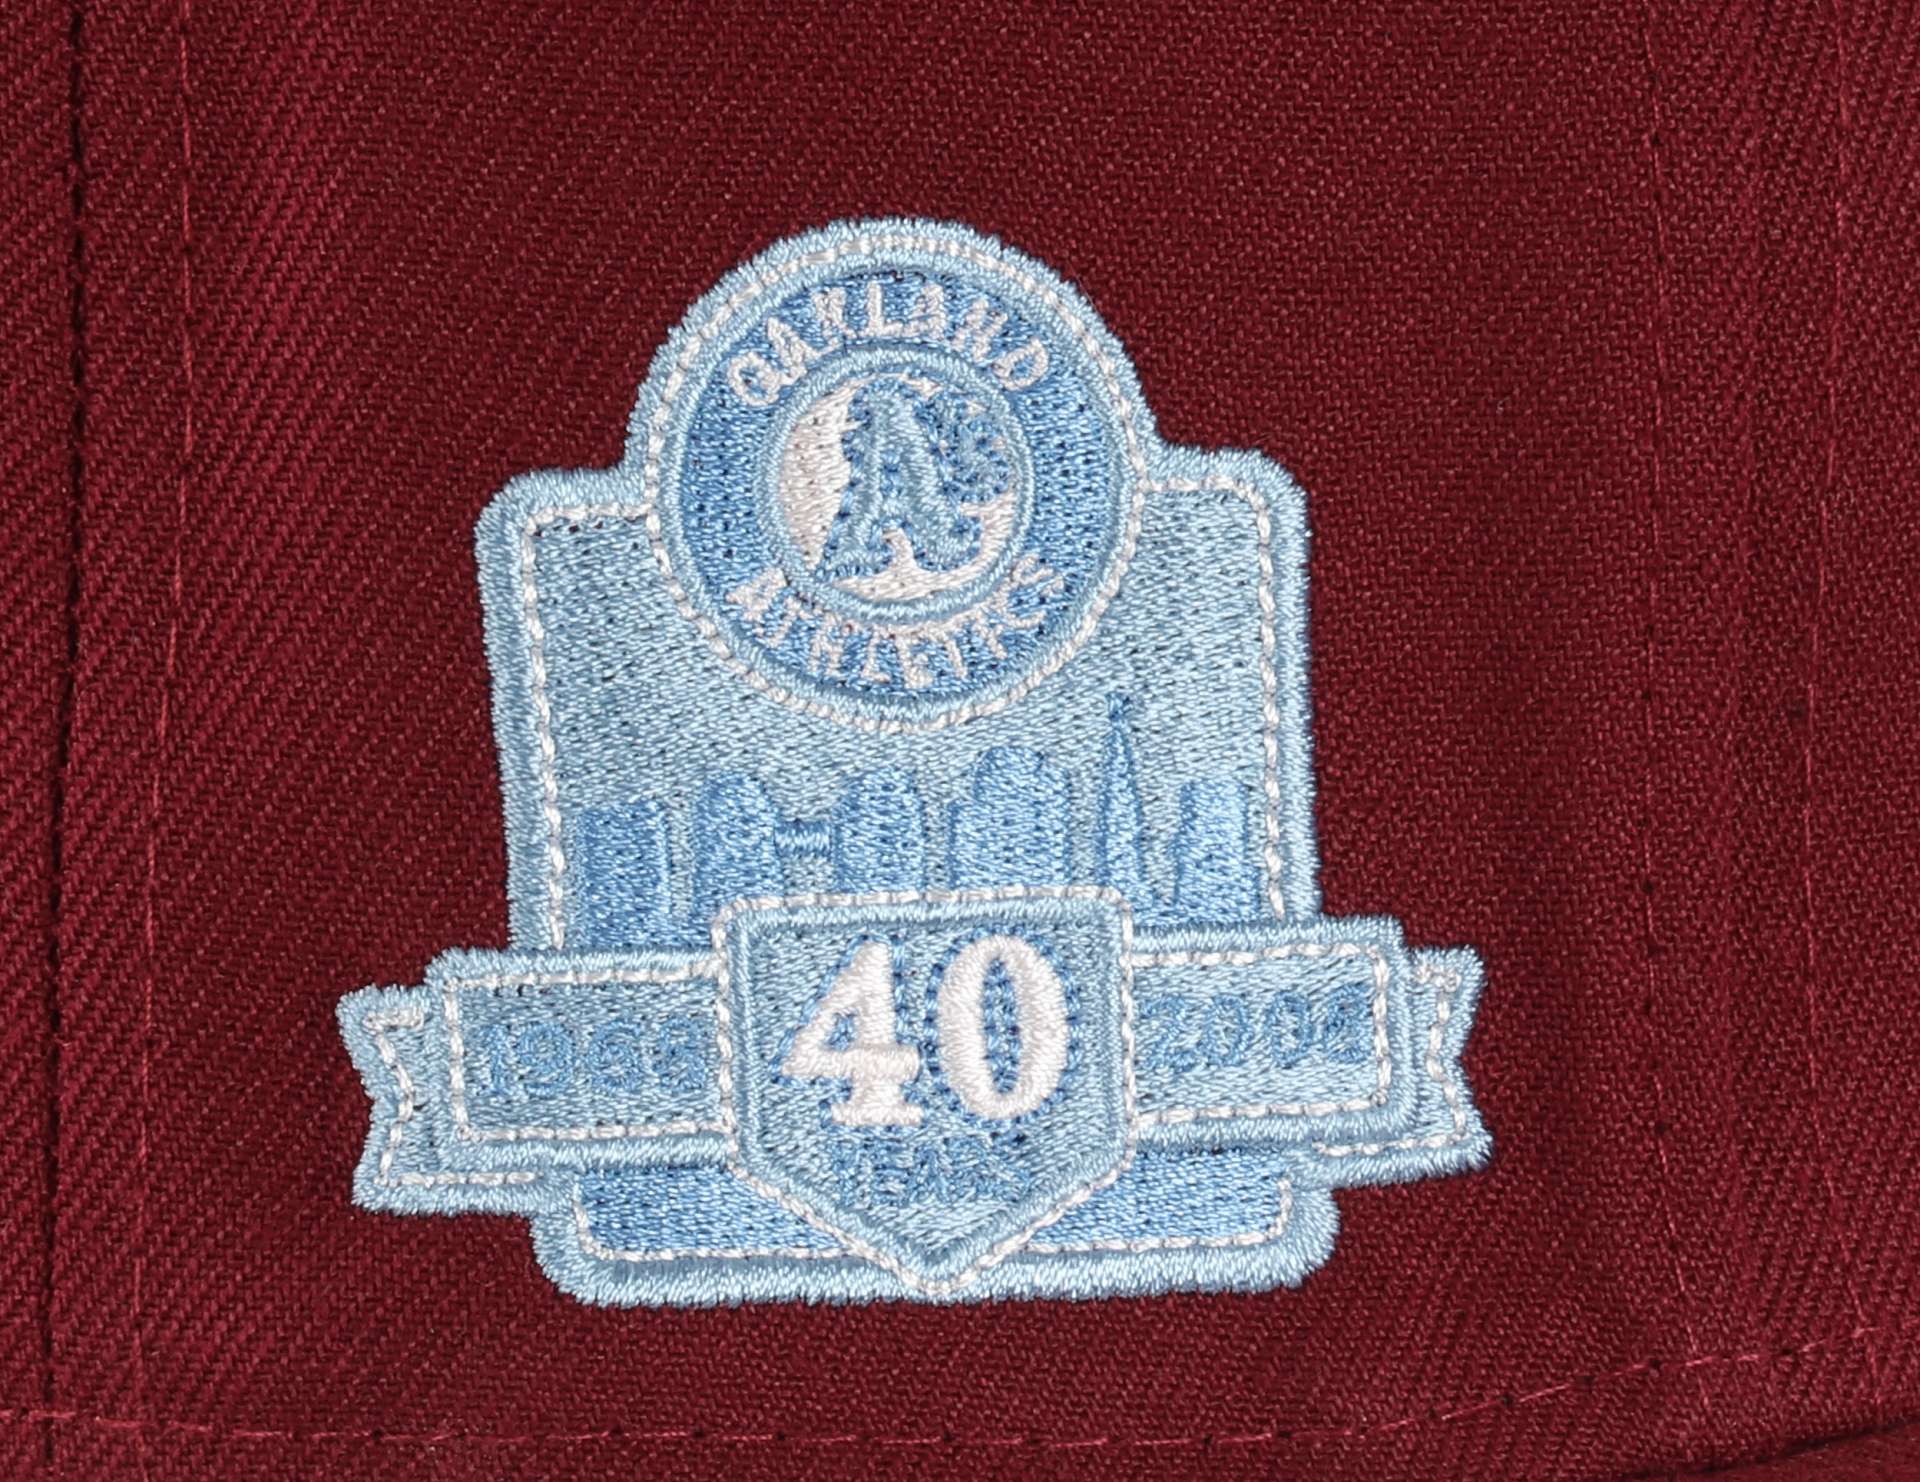 Oakland Athletics MLB Cooperstown 40th Anniversary Sidepatch Maroon Blue 59Fifty Basecap New Era